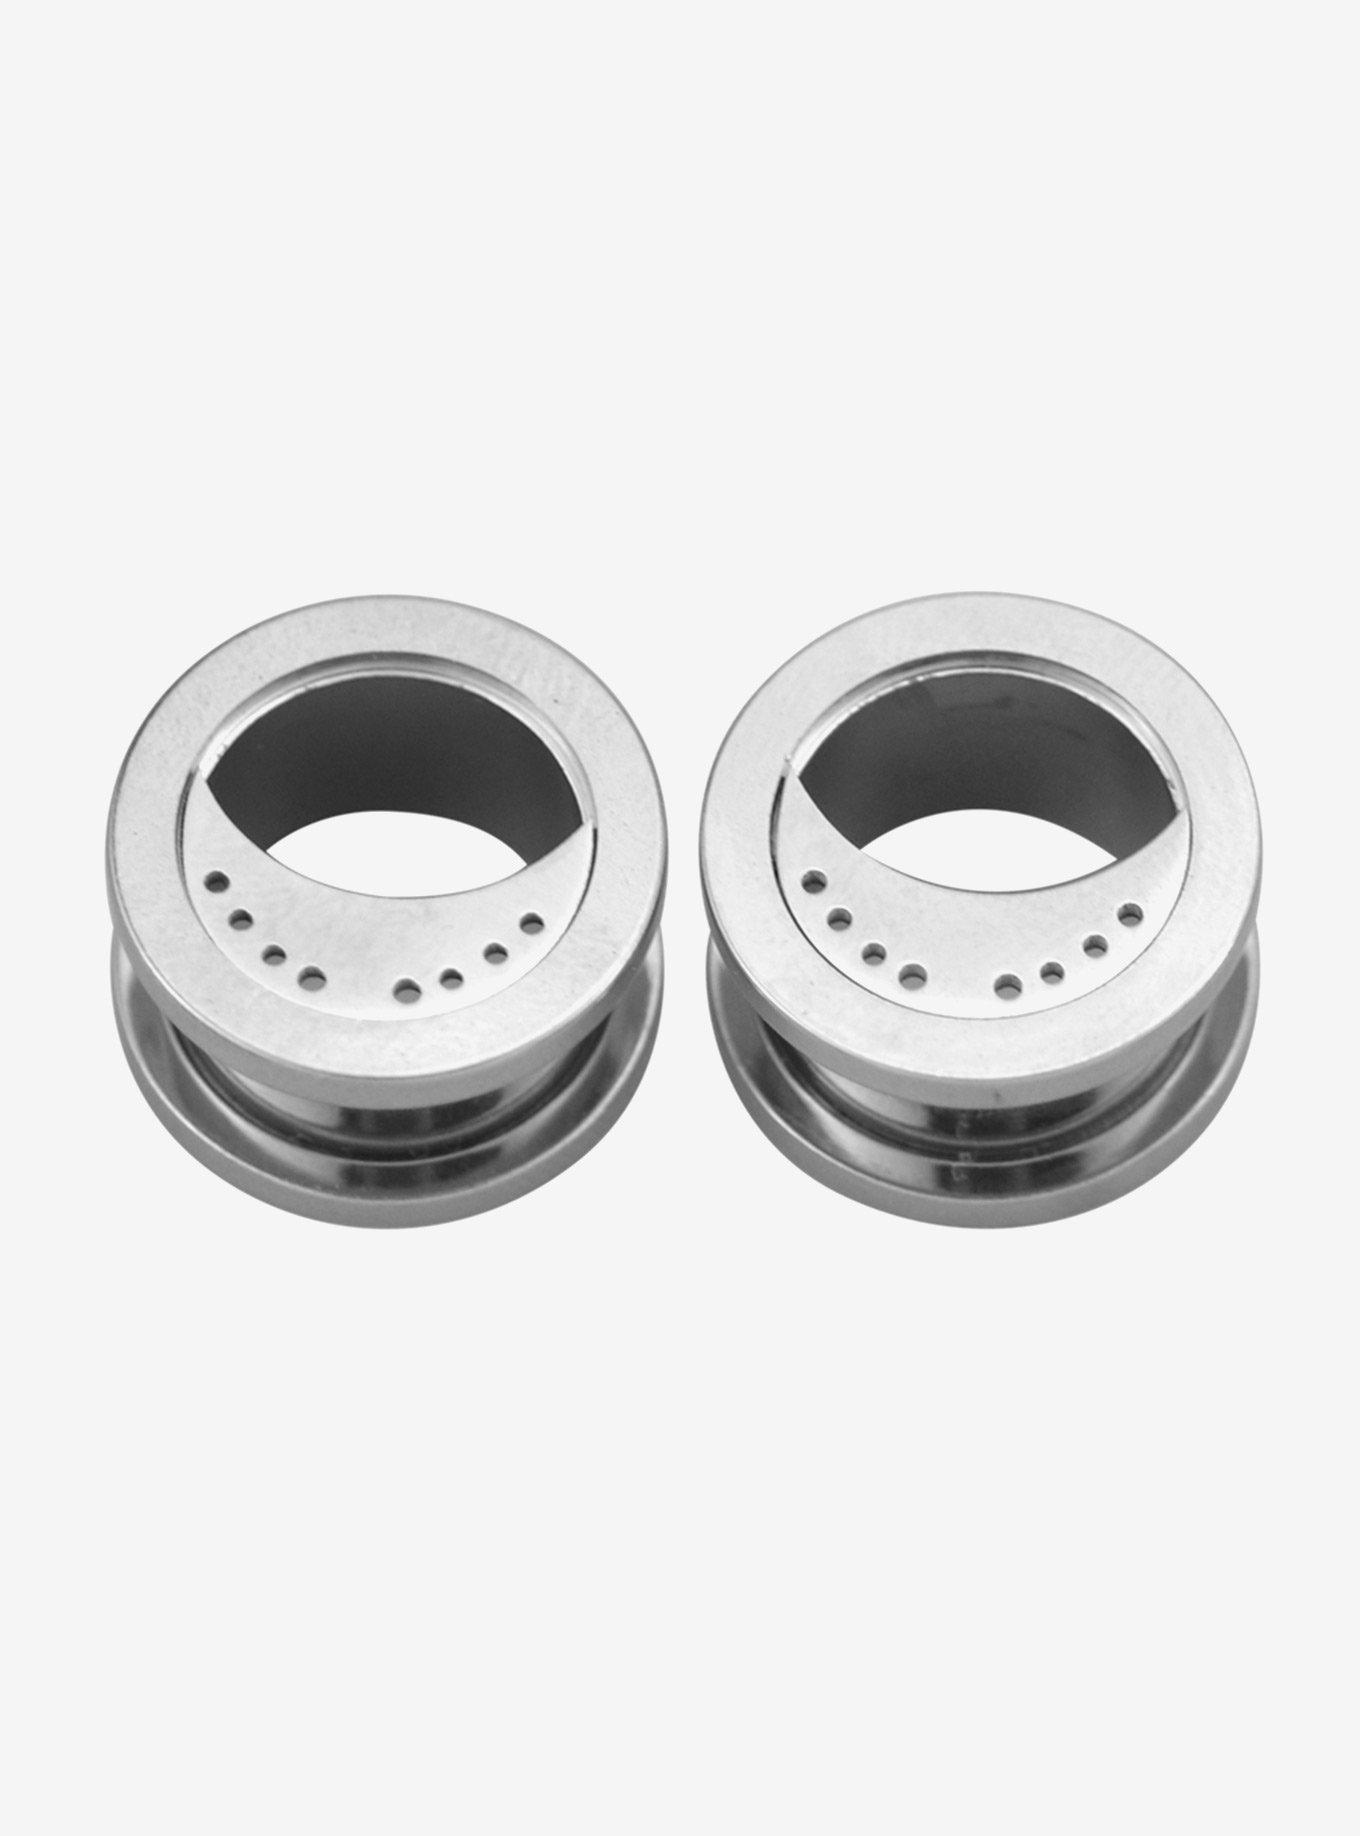 Steel Silver Crescent Moon Tunnel Plug 2 Pack, MULTI, hi-res